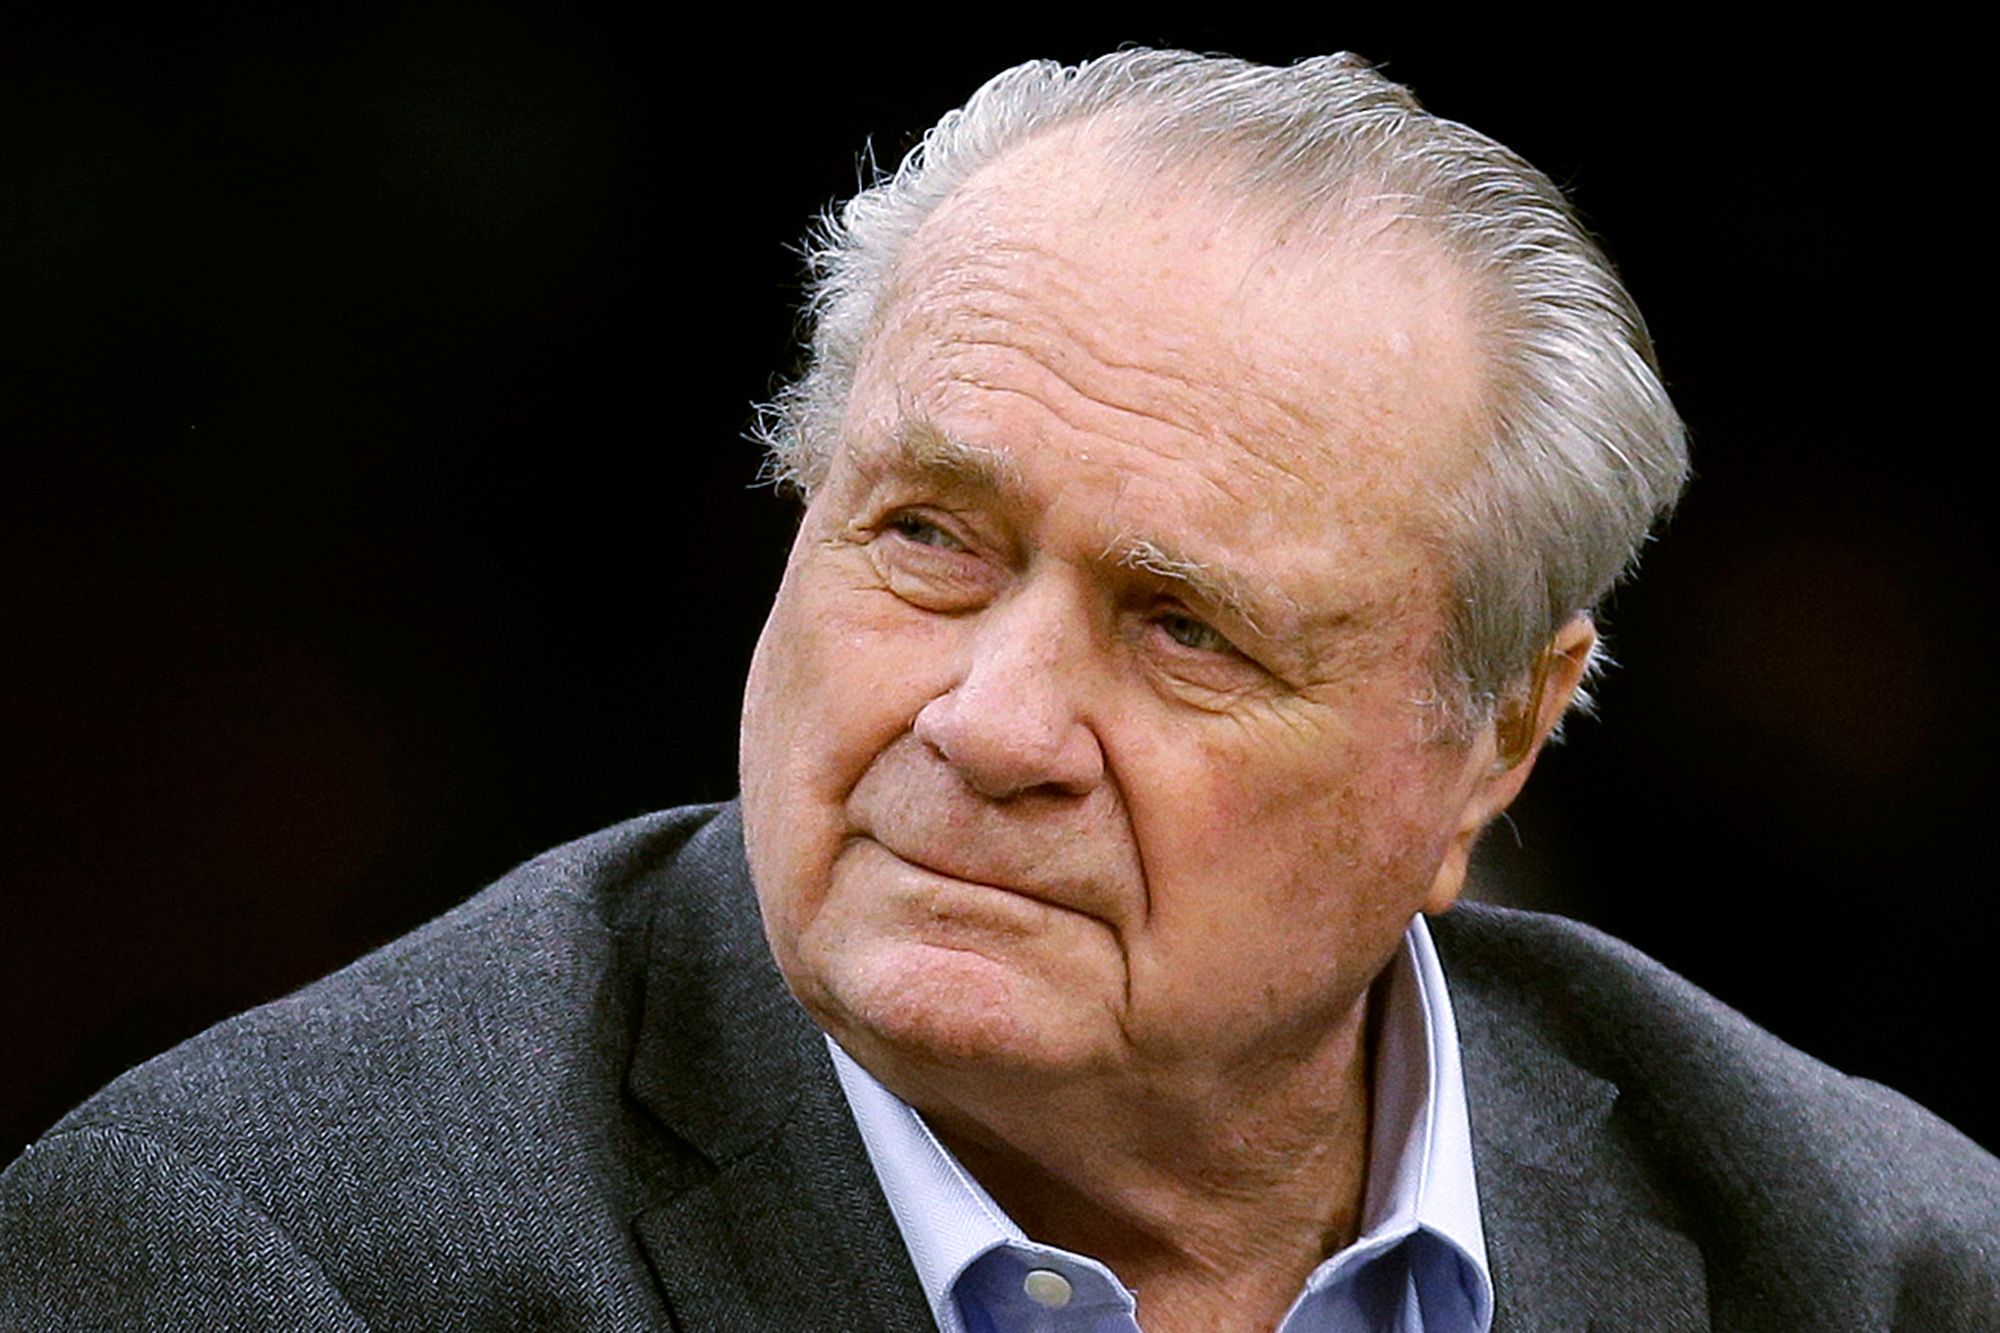 By The Numbers: Tommy Heinsohn's iconic career as Celtics player